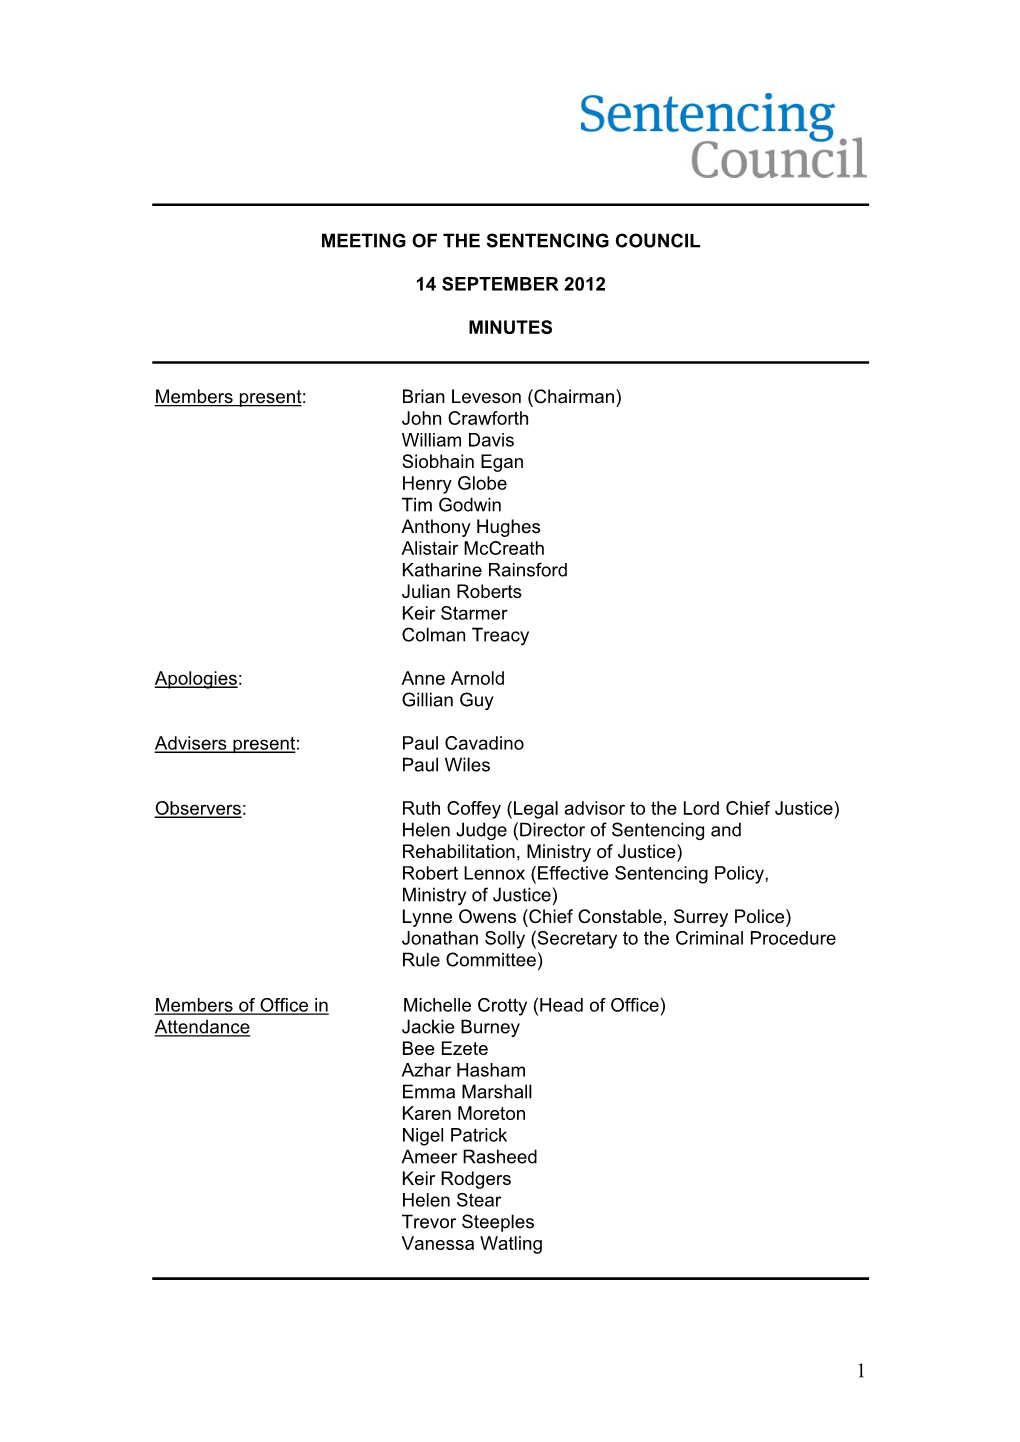 Minutes of the Sentencing Council, 14 September 2012